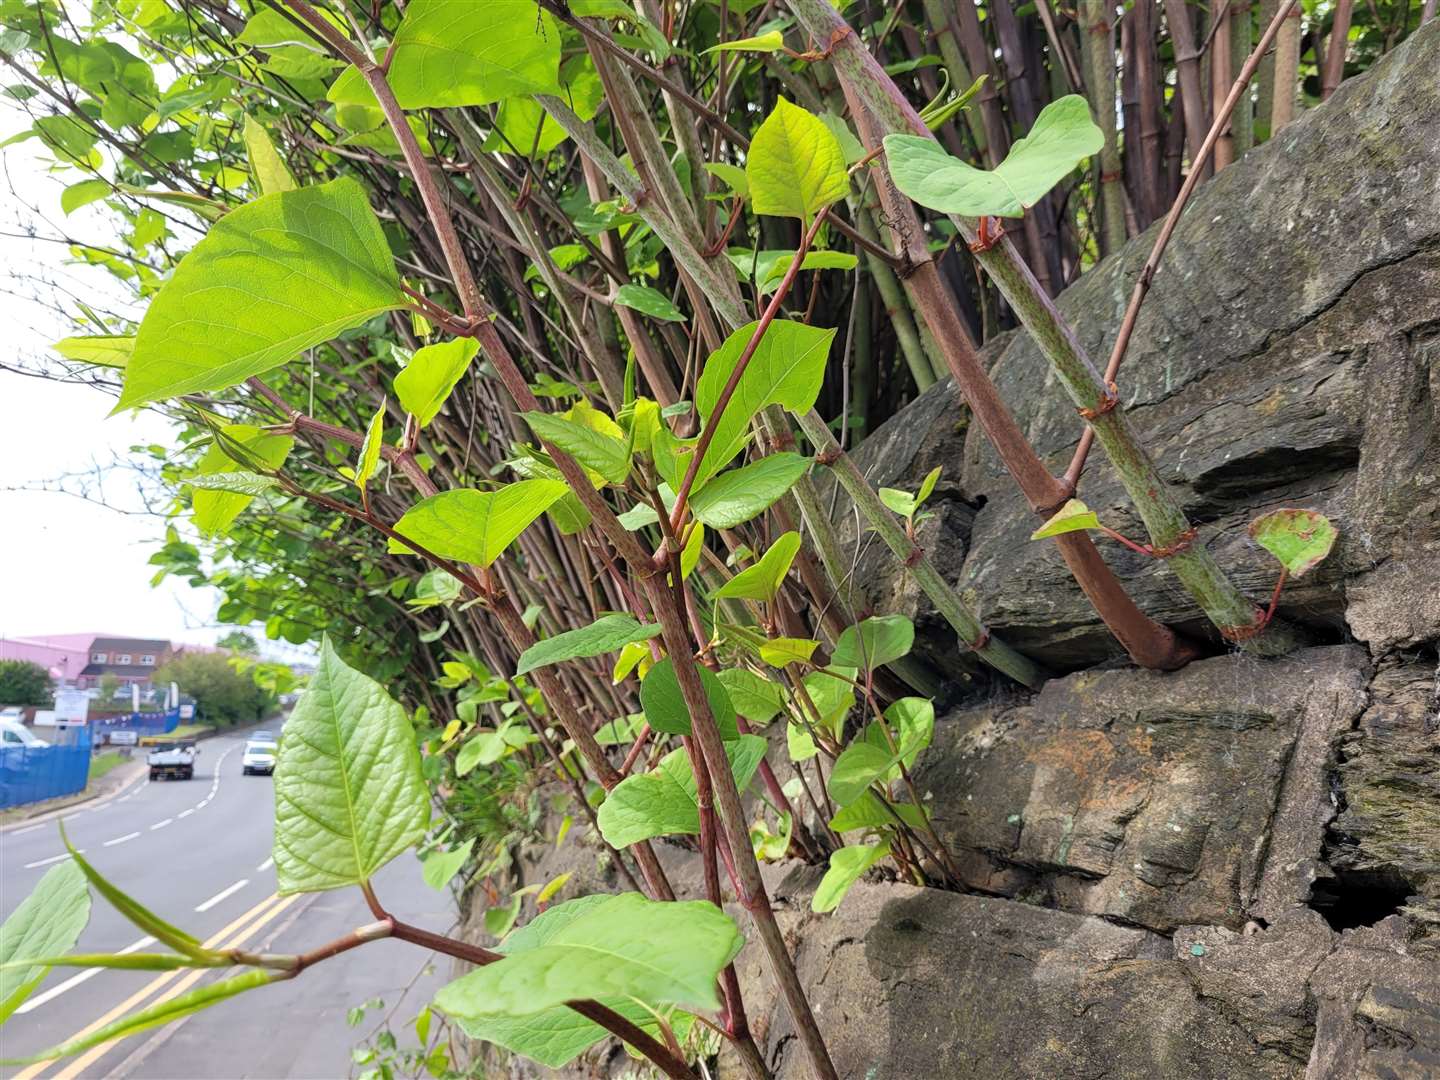 Japanese Knotweed is among the plants people are advised to avoid